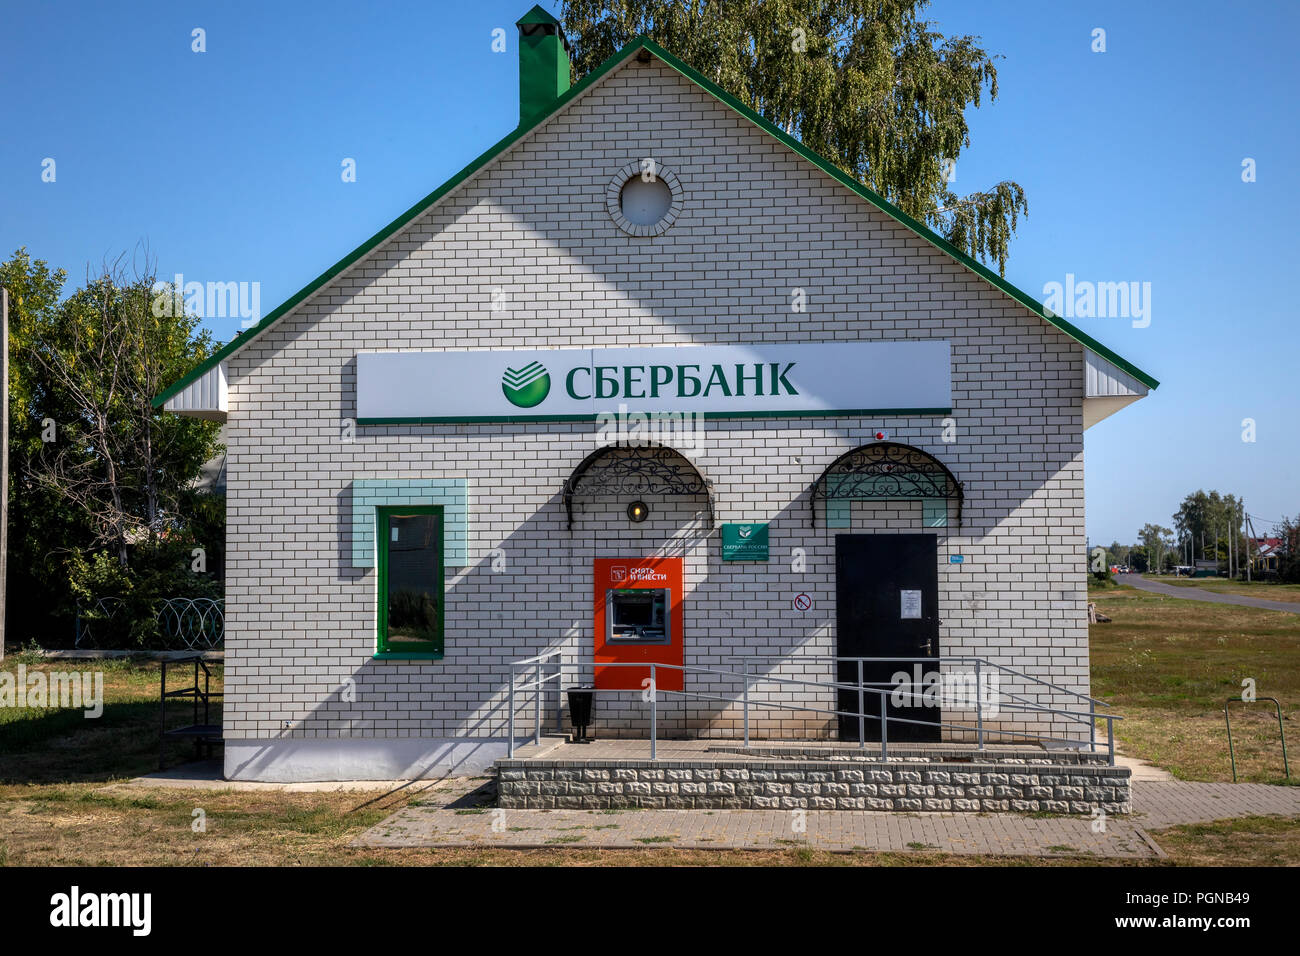 View of the Sberbank branch in the village of Tambov region, Russia Stock Photo